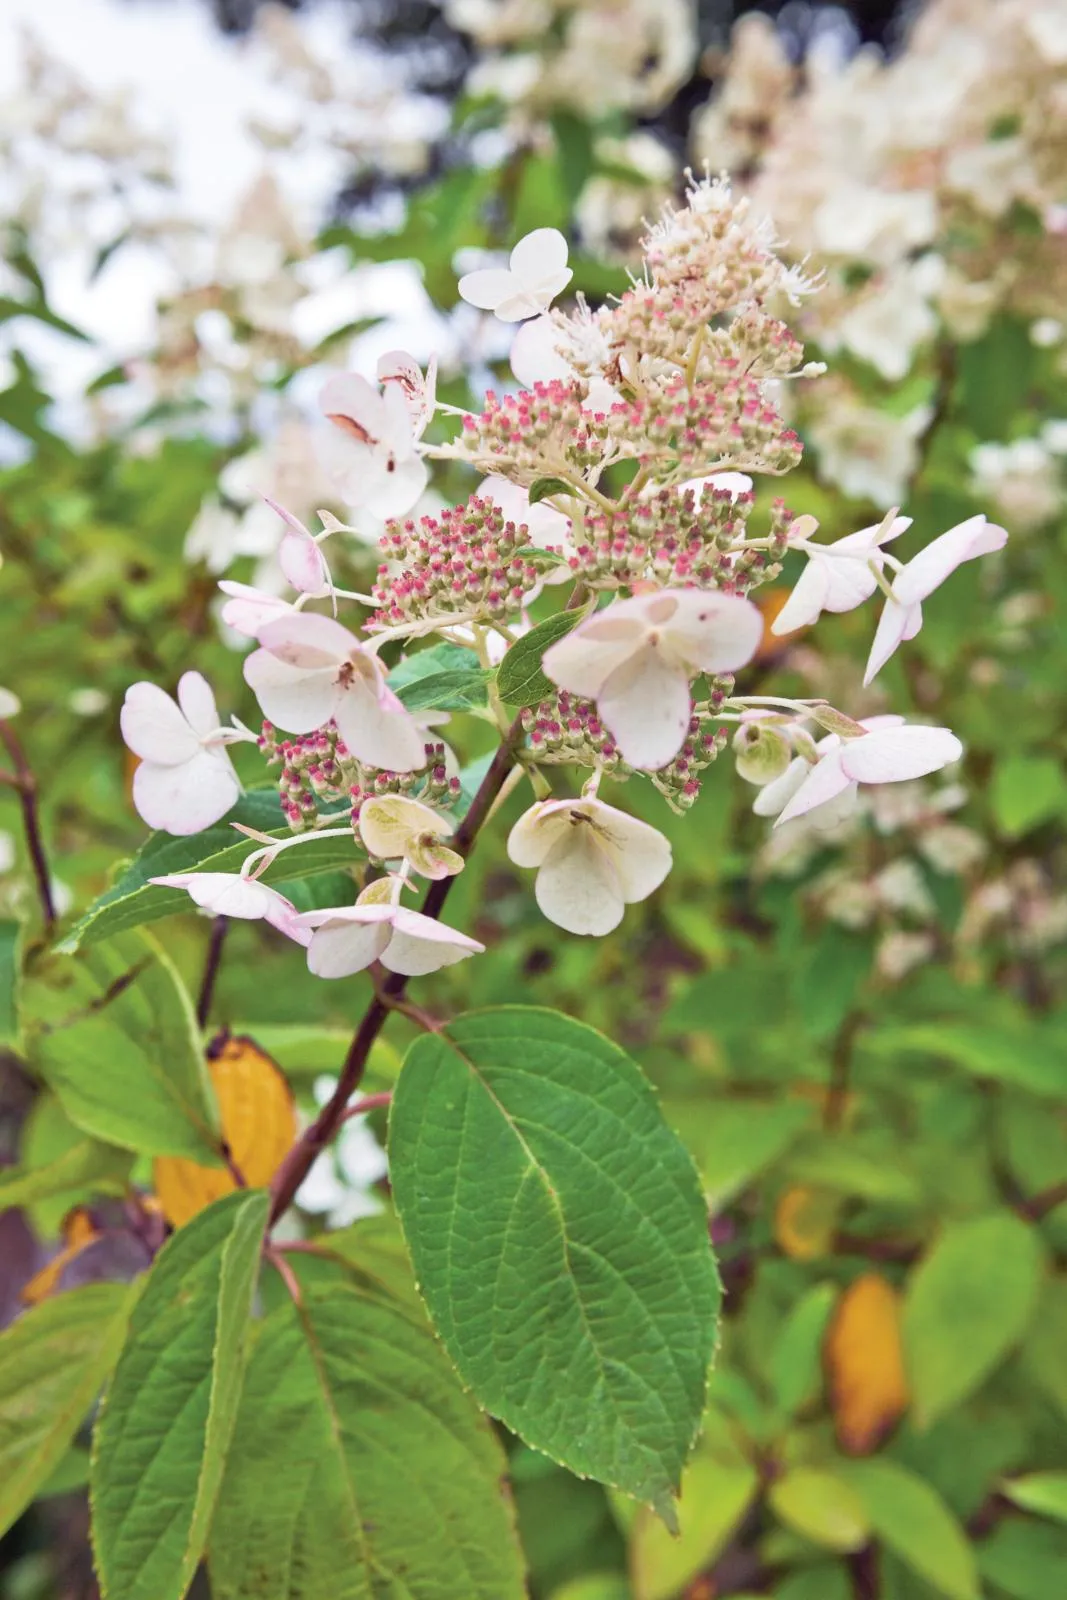 Hydrangea paniculata ‘Greenspire’ has upright stems carrying lacy cones of tiny, fertile flowers studded with large, sterile ones, green at first then becoming pink